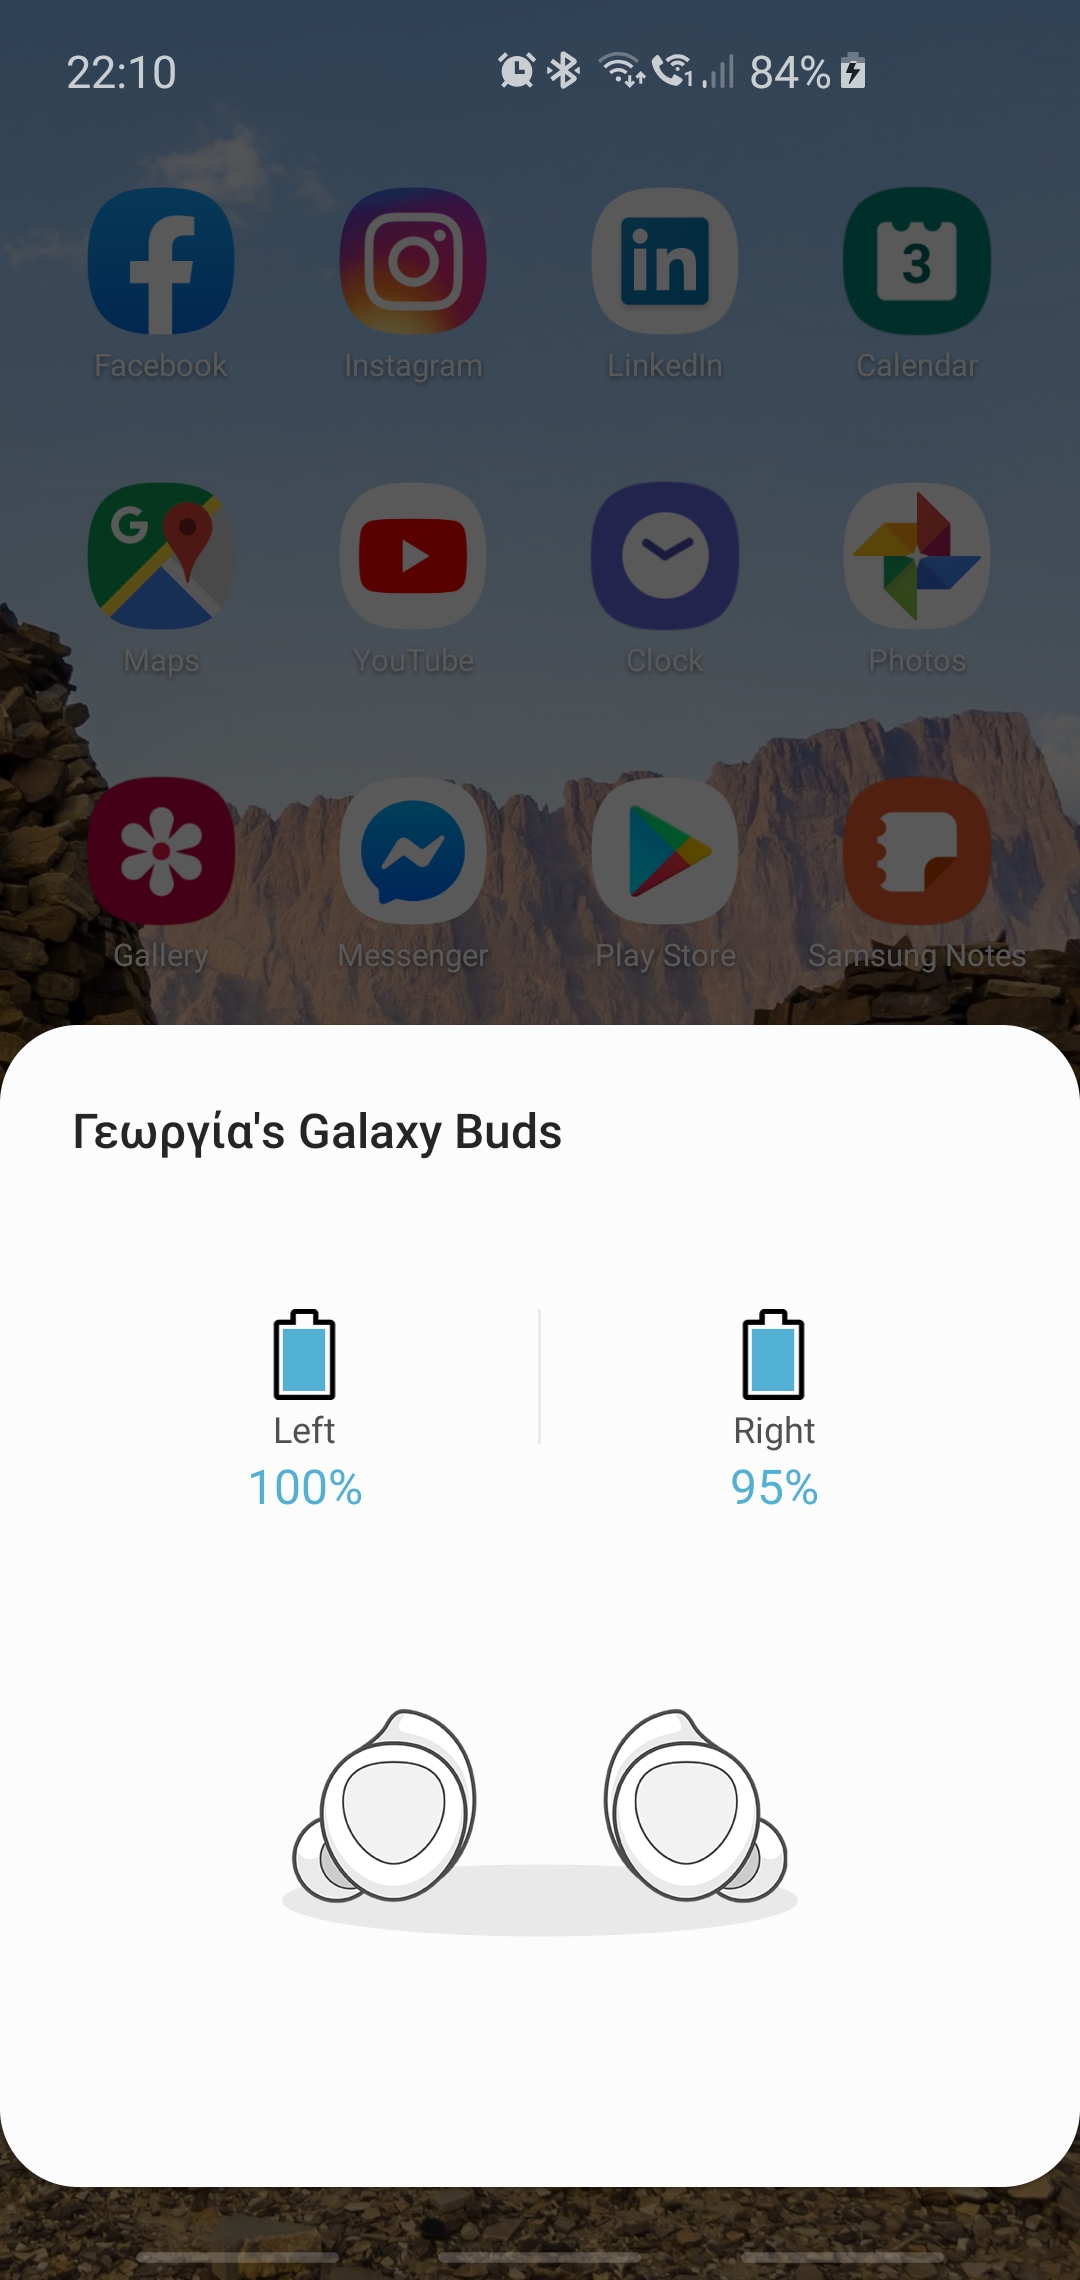 Galaxy Buds Pop-Up Window different name - Samsung Members